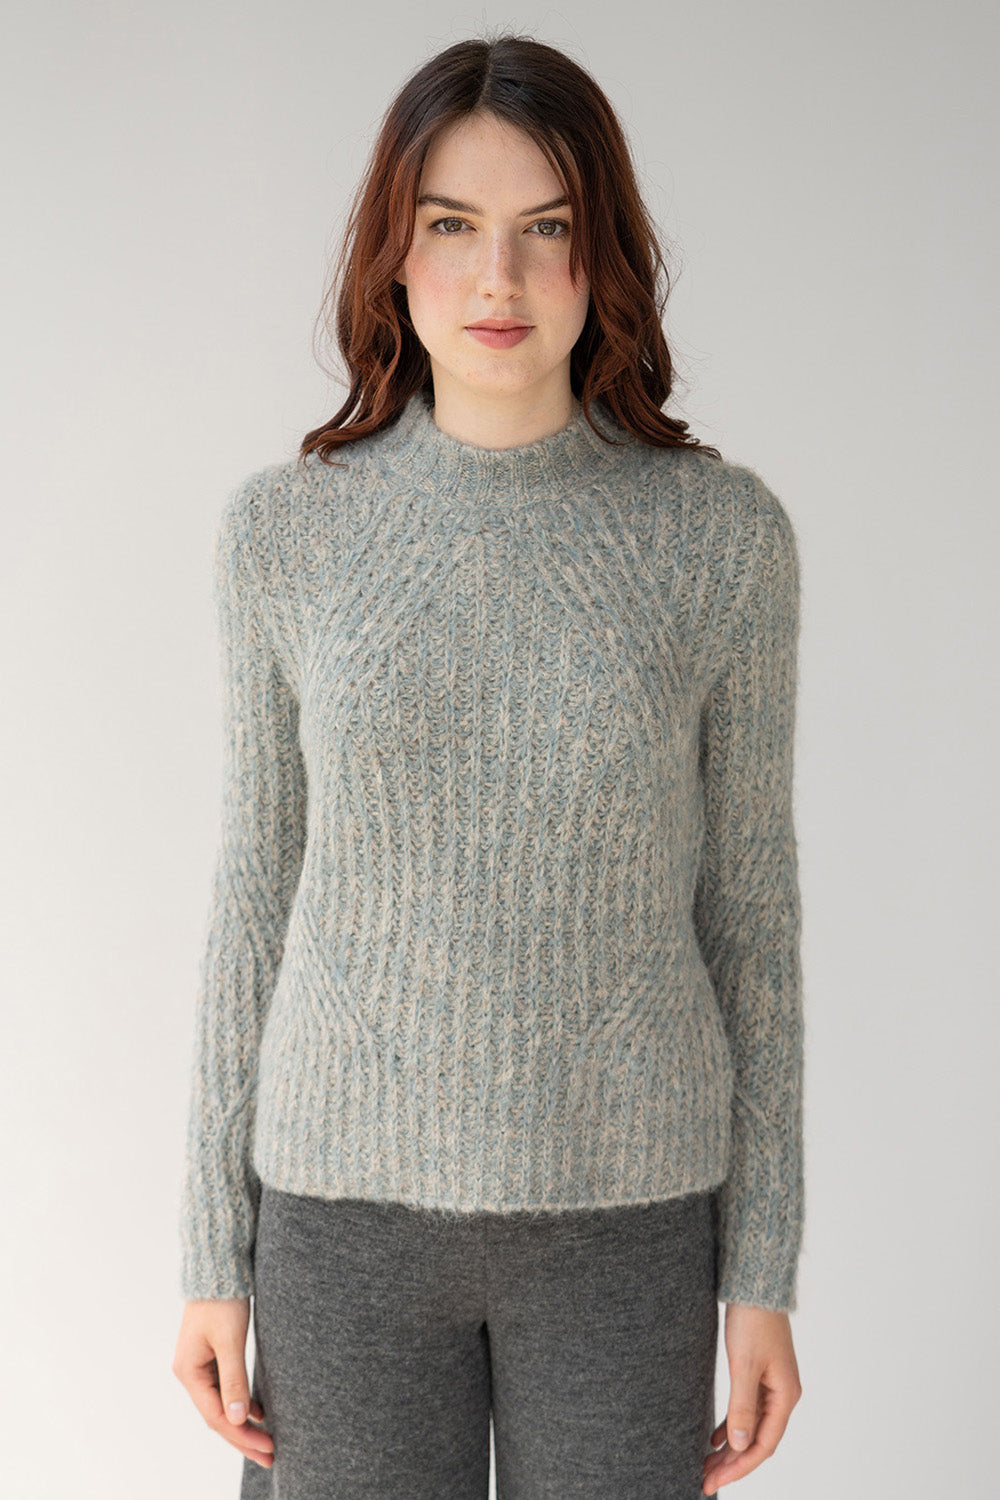 Vik transfer rib pullover in grey oat marl features a rib stitch for movement